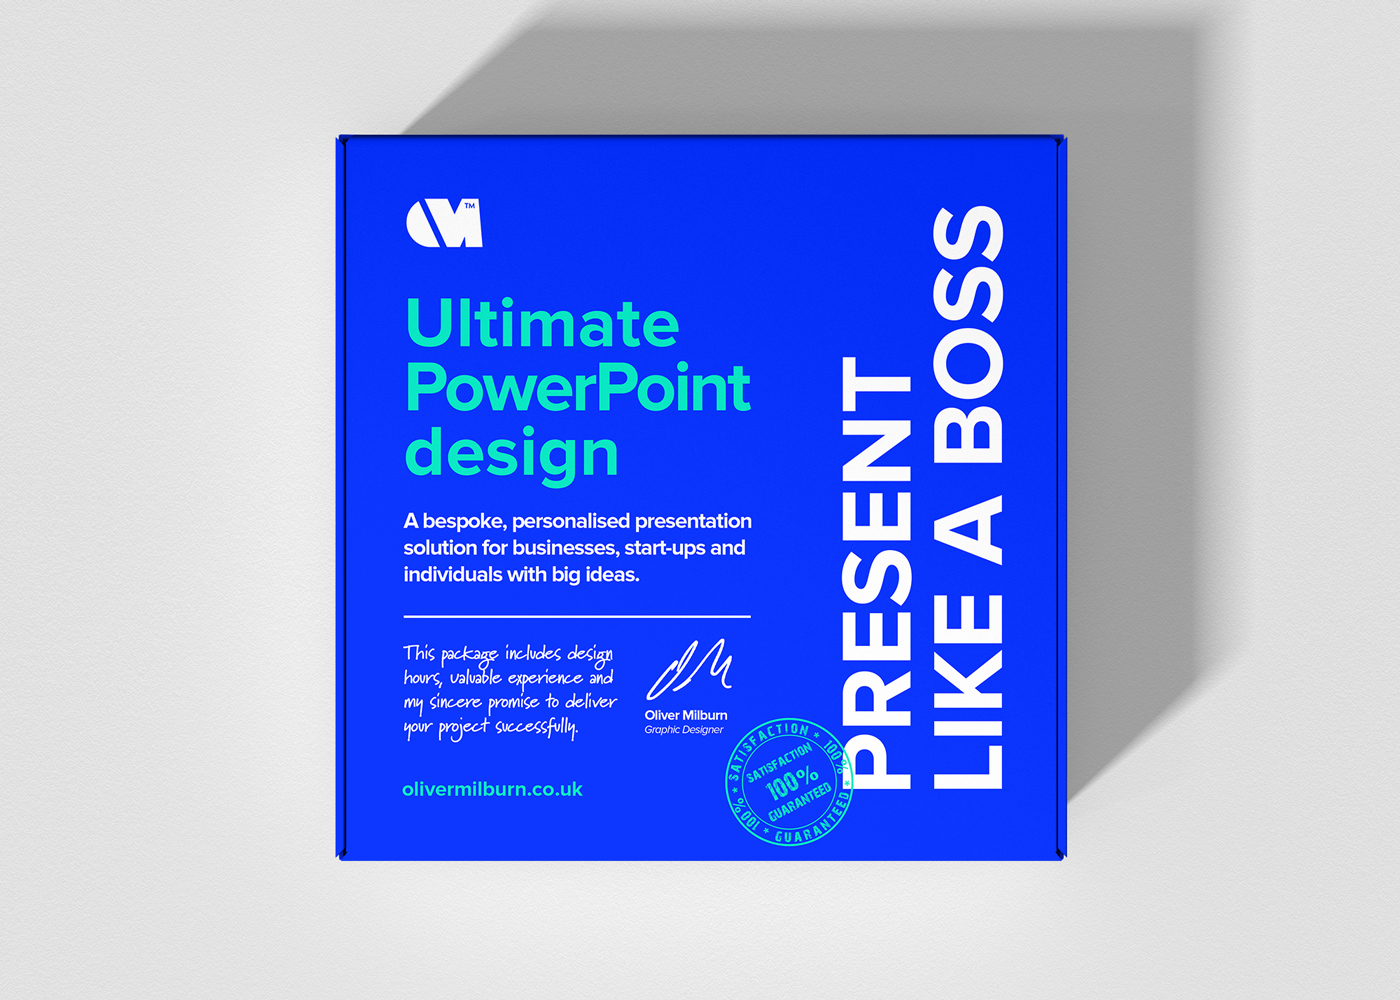 The ultimate PowerPoint presentation design package by Oliver Milburn